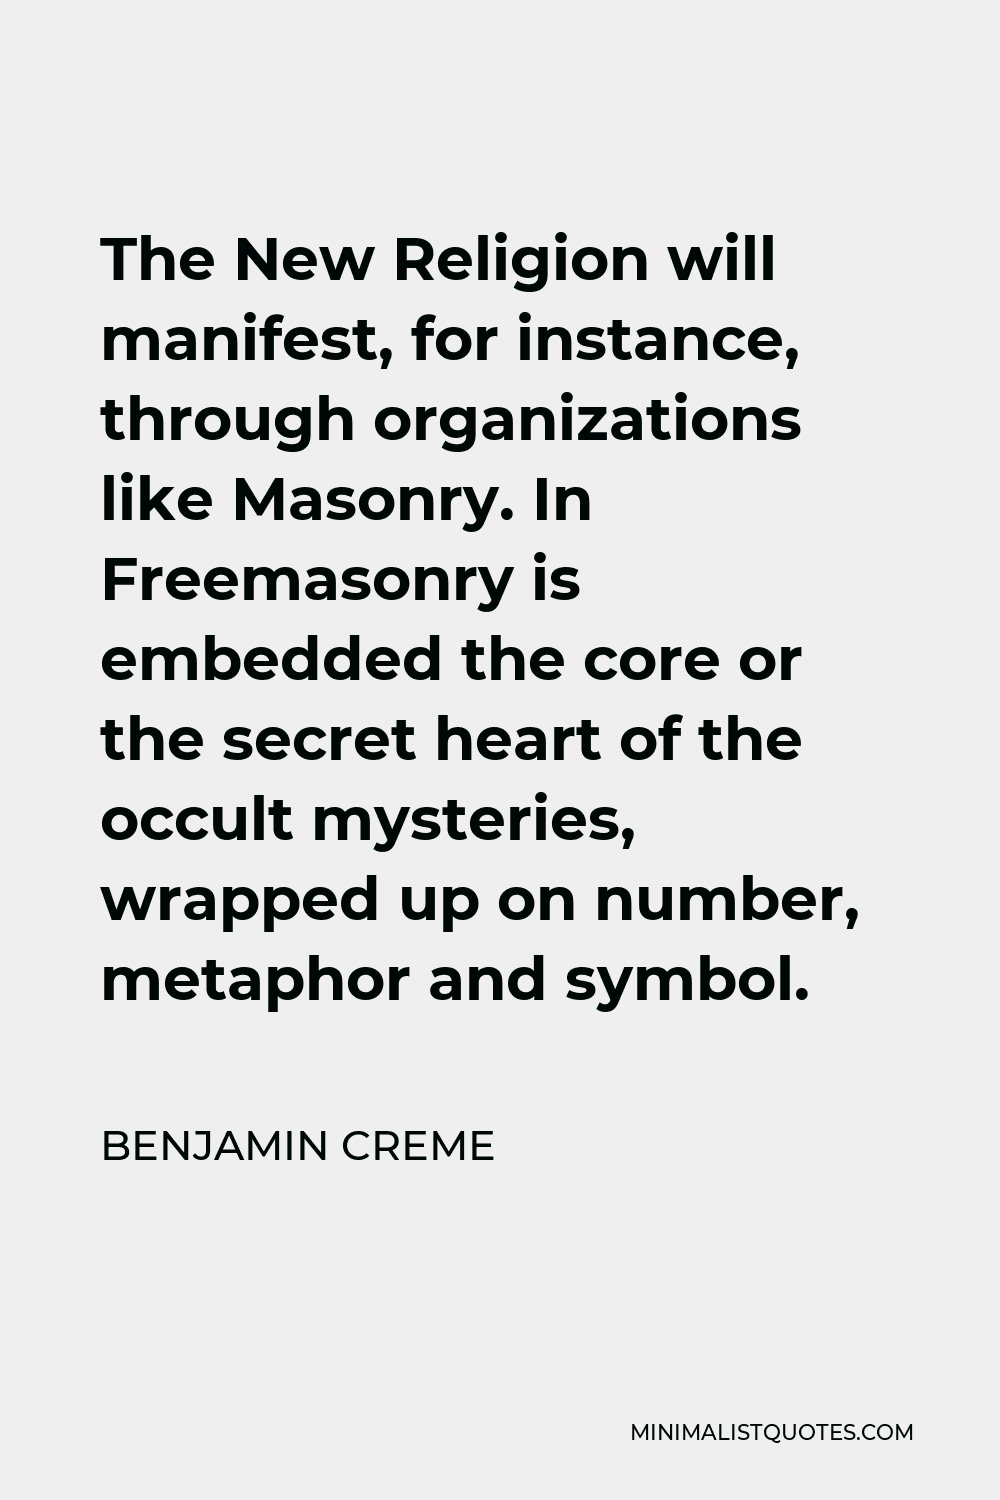 Benjamin Creme Quote - The New Religion will manifest, for instance, through organizations like Masonry. In Freemasonry is embedded the core or the secret heart of the occult mysteries, wrapped up on number, metaphor and symbol.